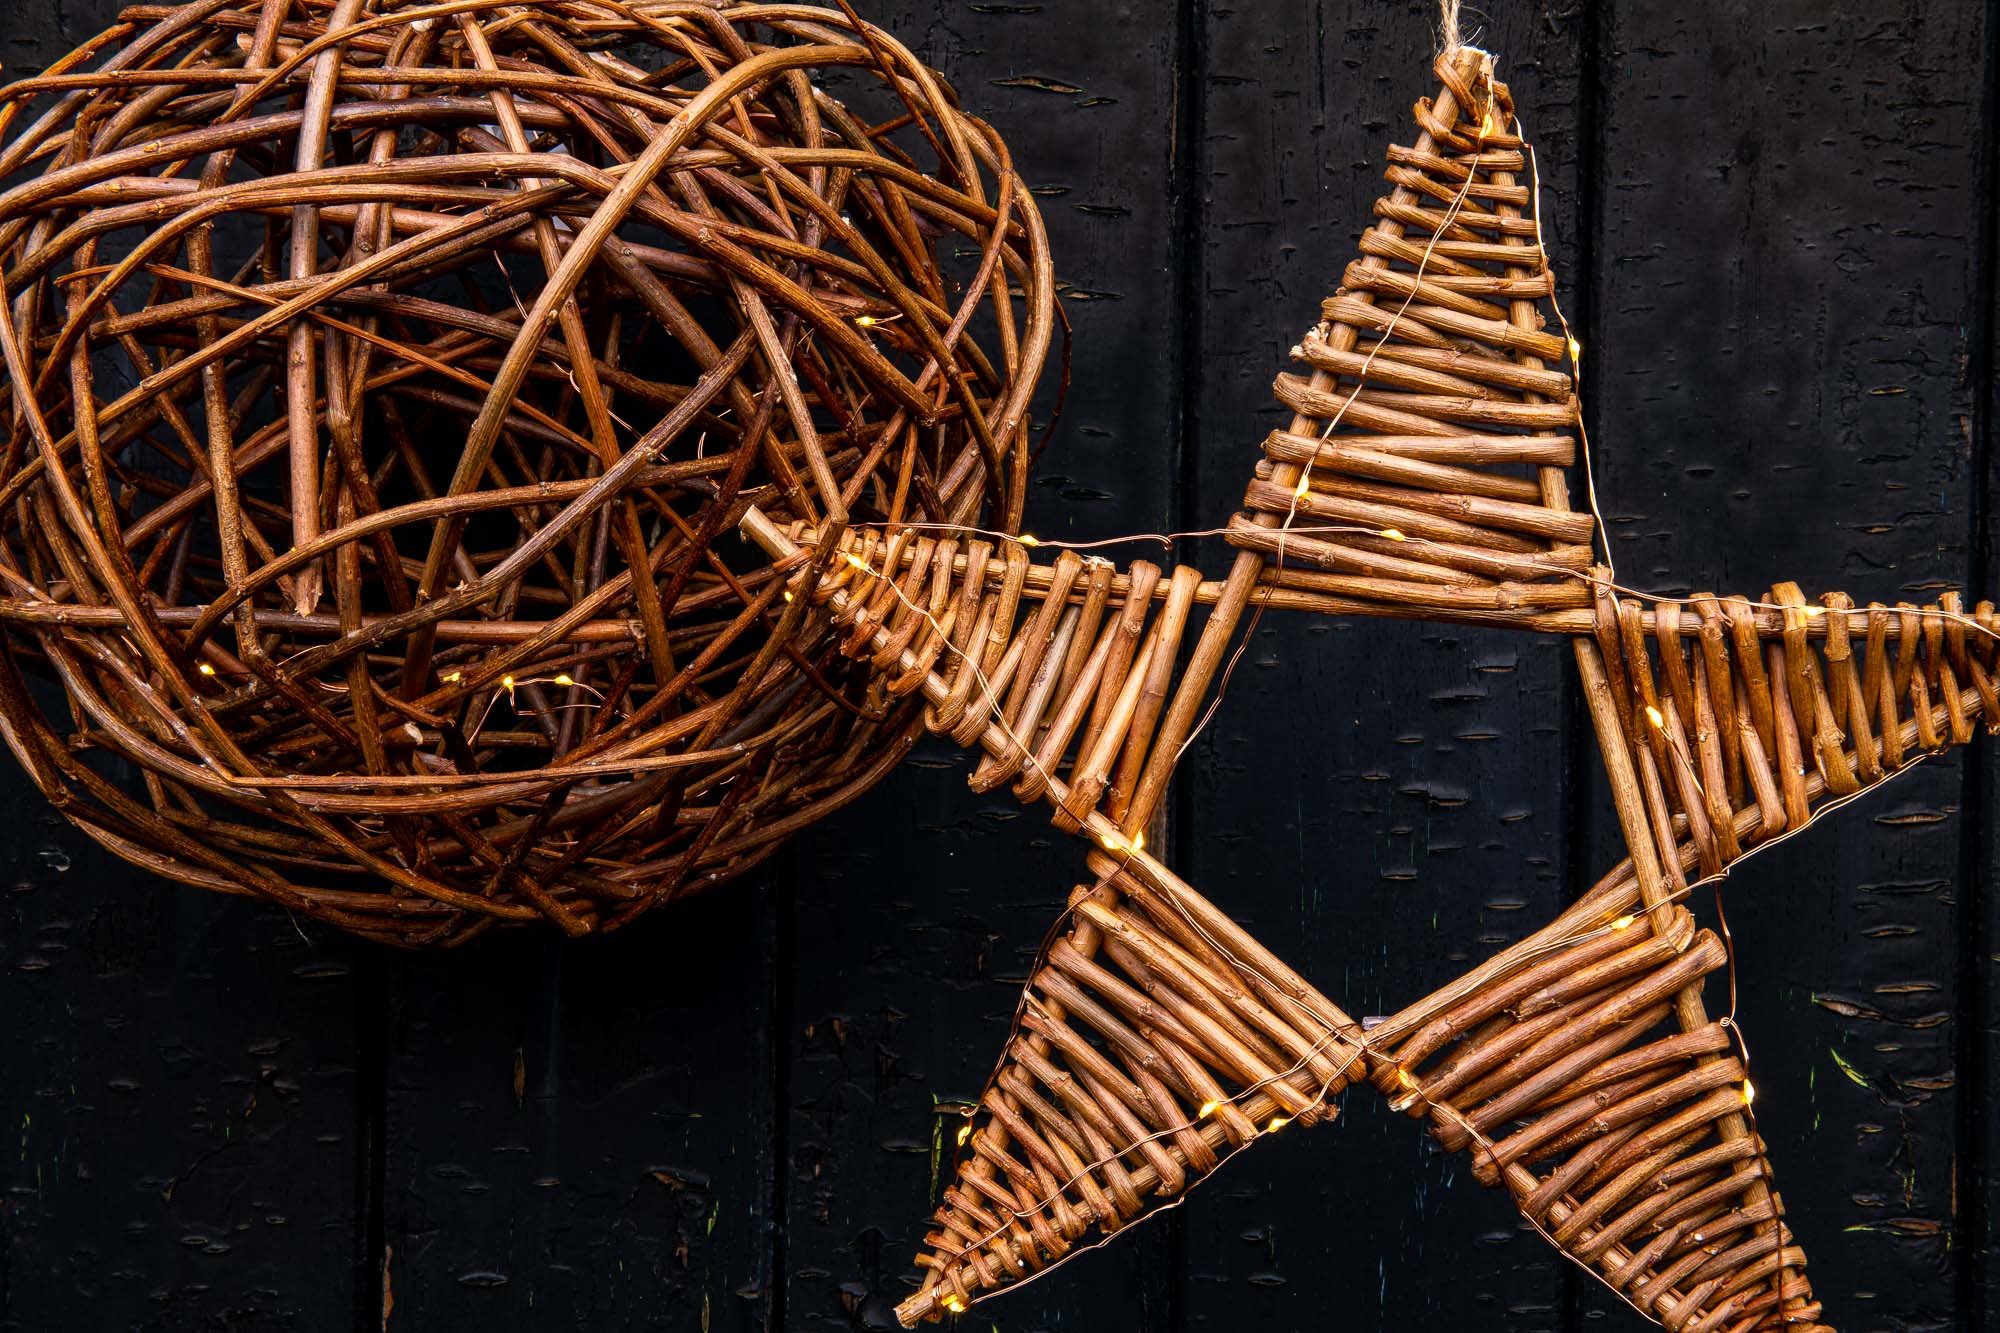 Willow star & globe kit WITH VIDEO TUTORIALS